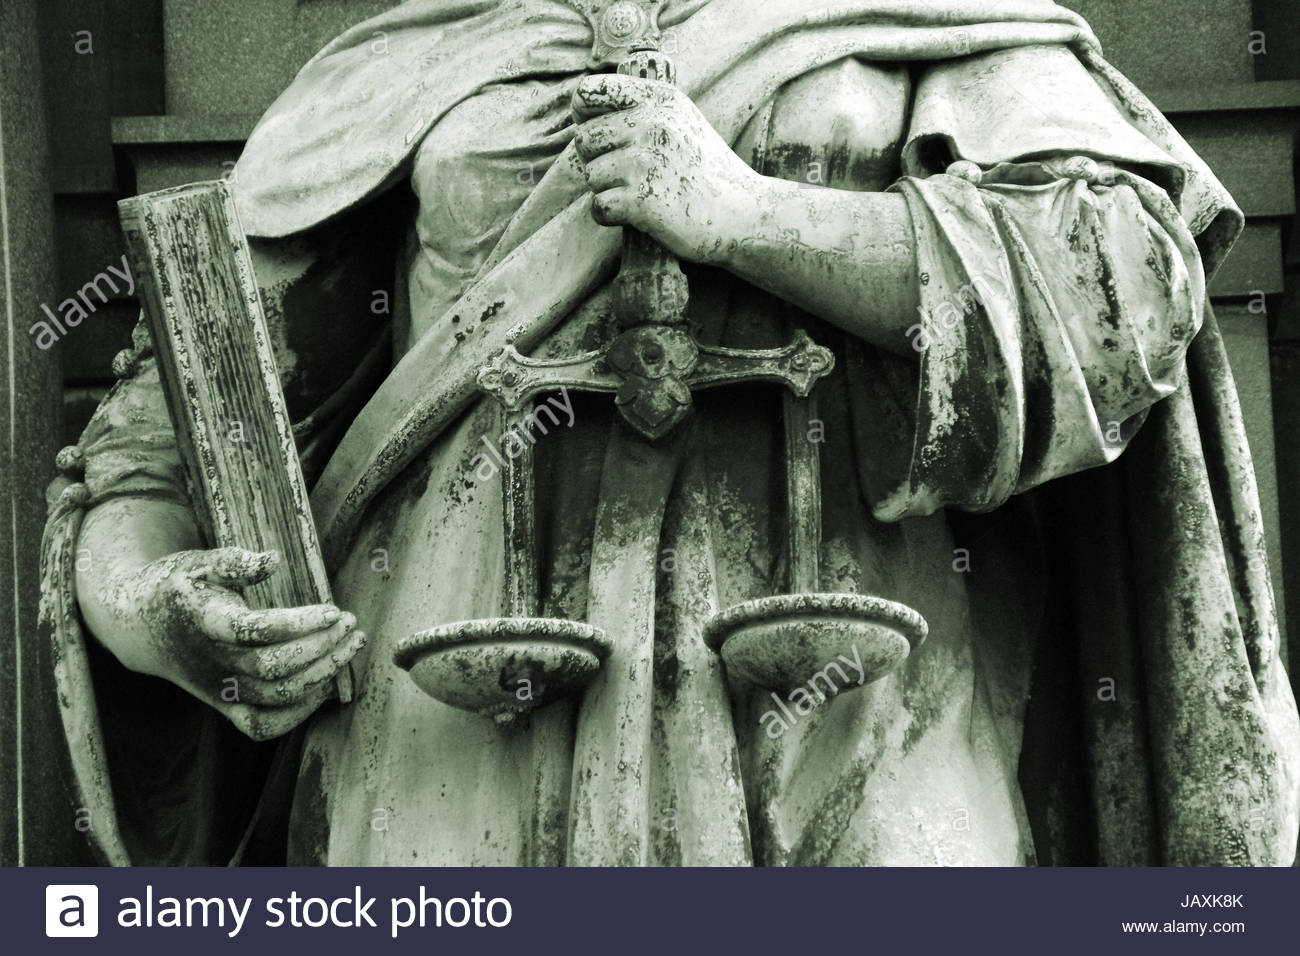 justitia holding the scales of justice as a symbol  of equality before the law Stock Photo